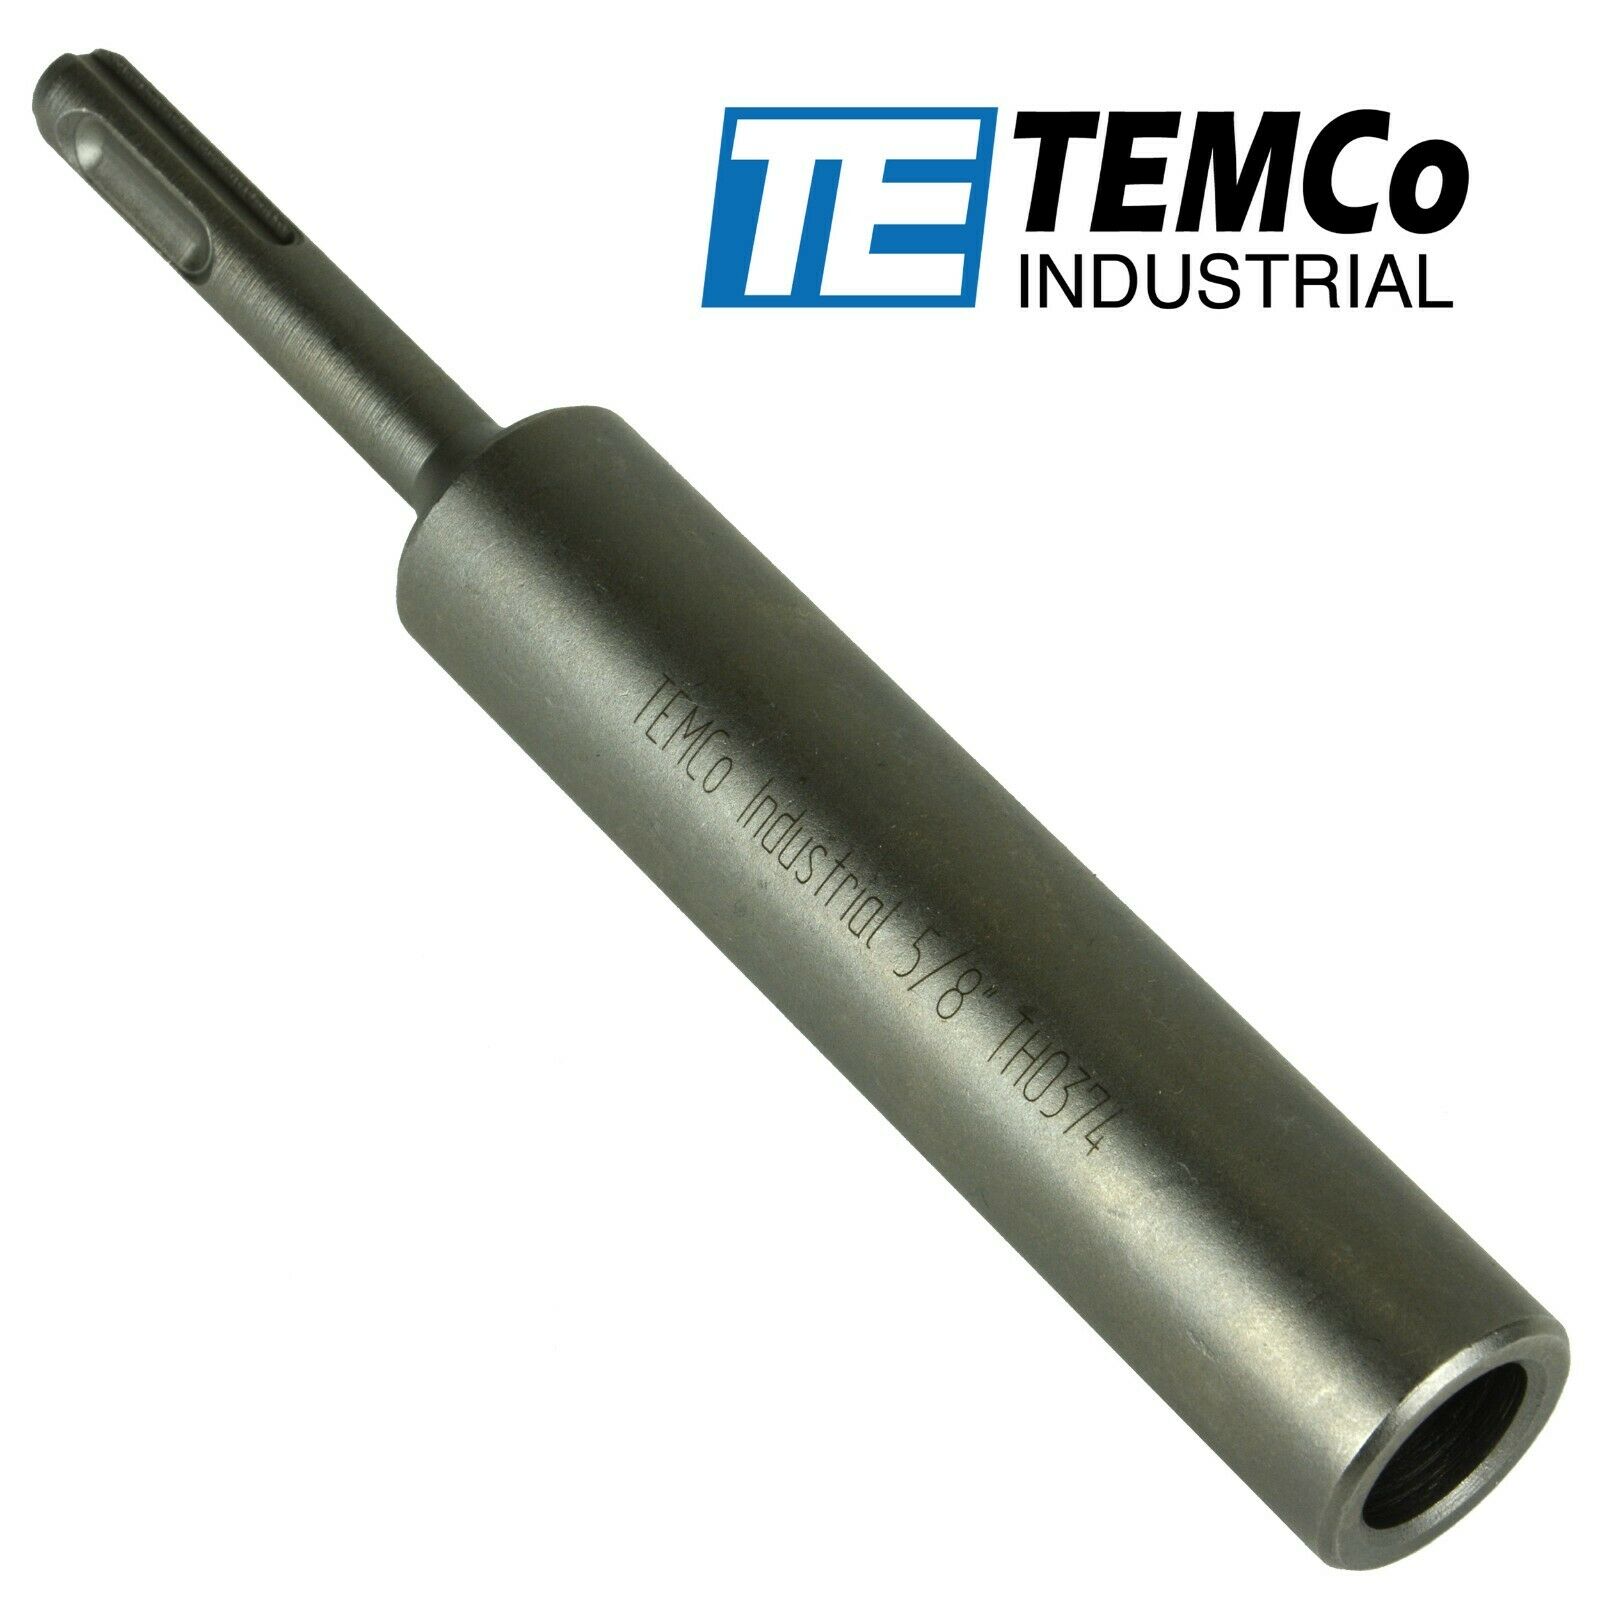 Temco Industrial - 5/8" Bore Sds Plus Ground Rod Driver